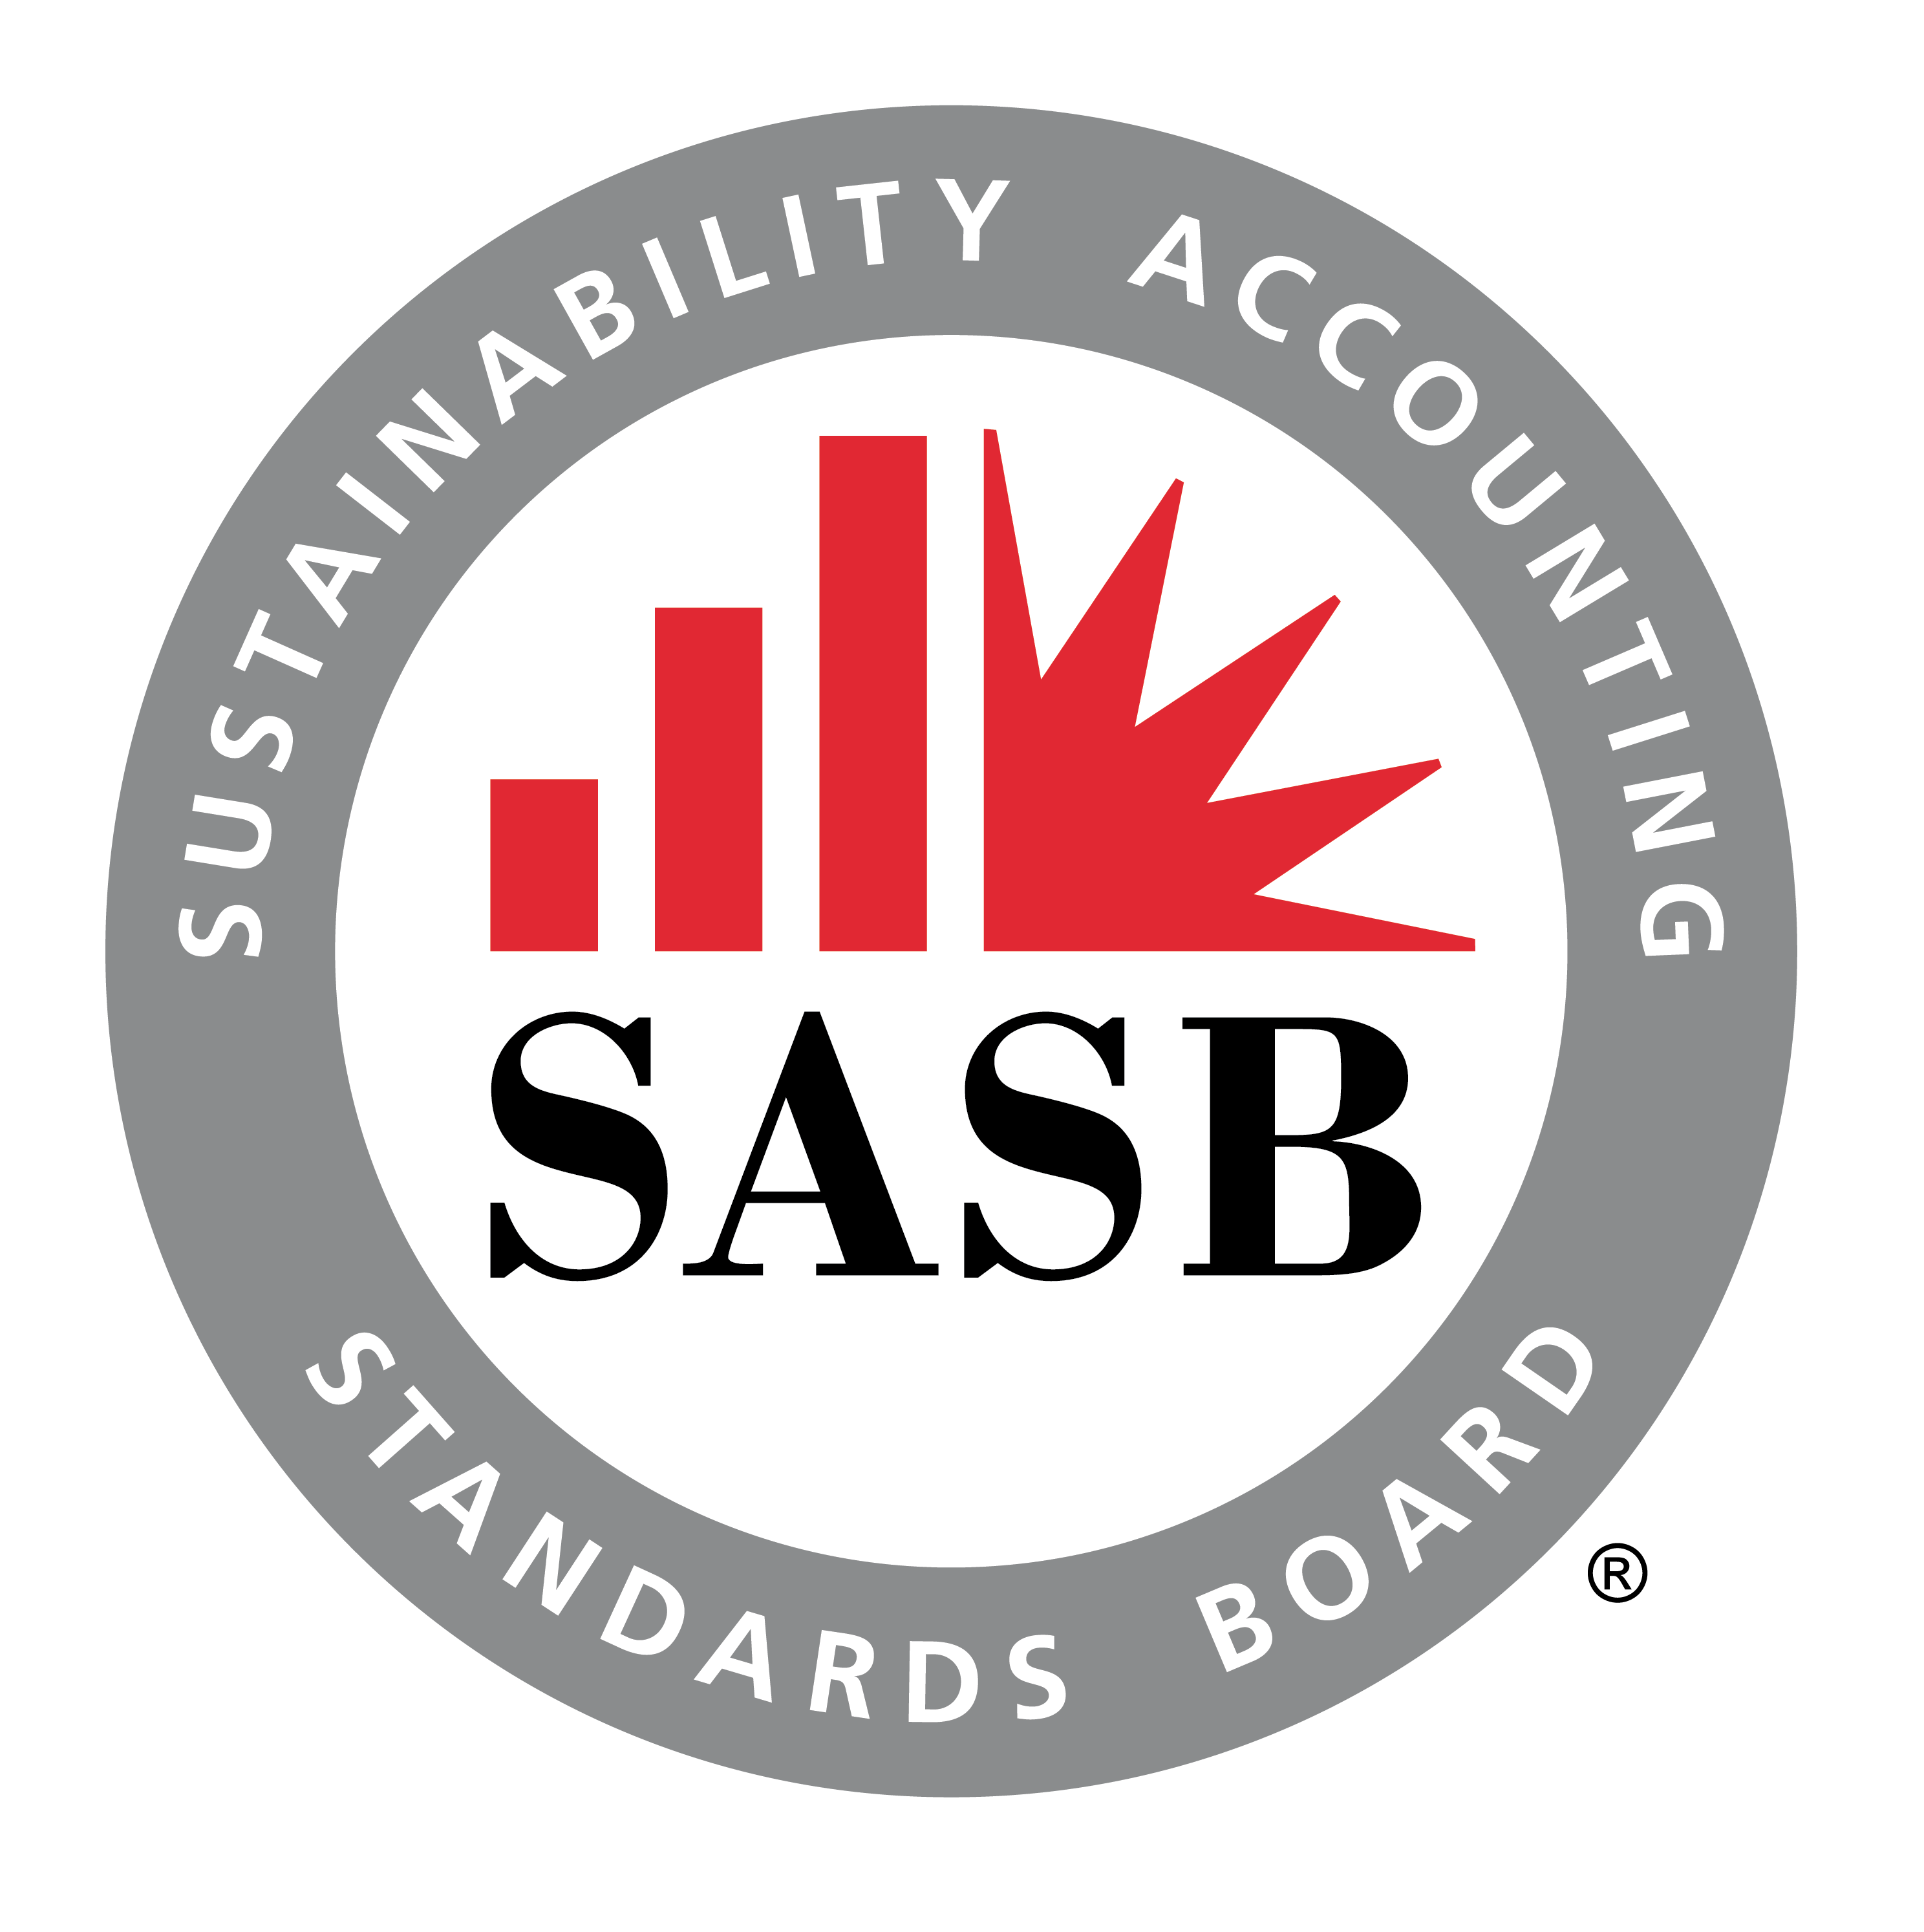 SASB logo which is circle graphic with SASB in middle with graph and starburst